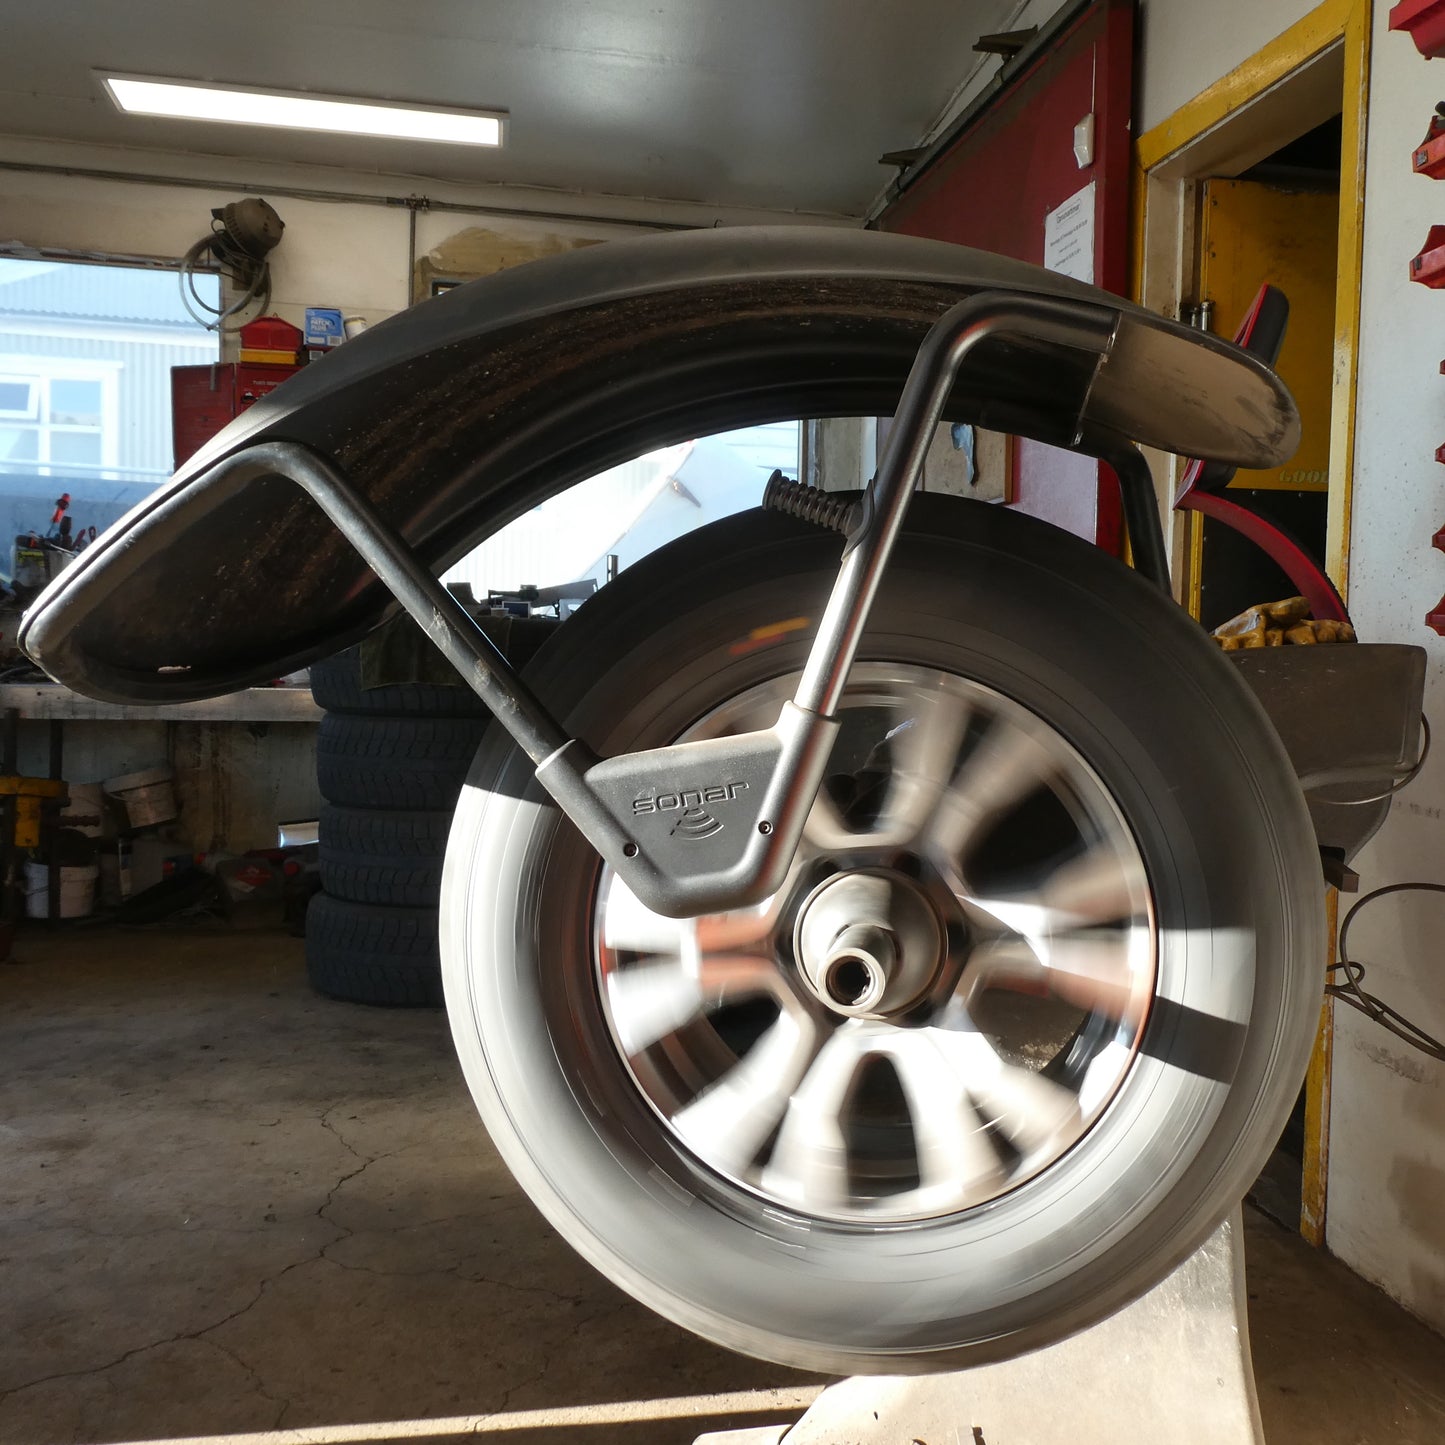 Changing Tyres in a Small Garage